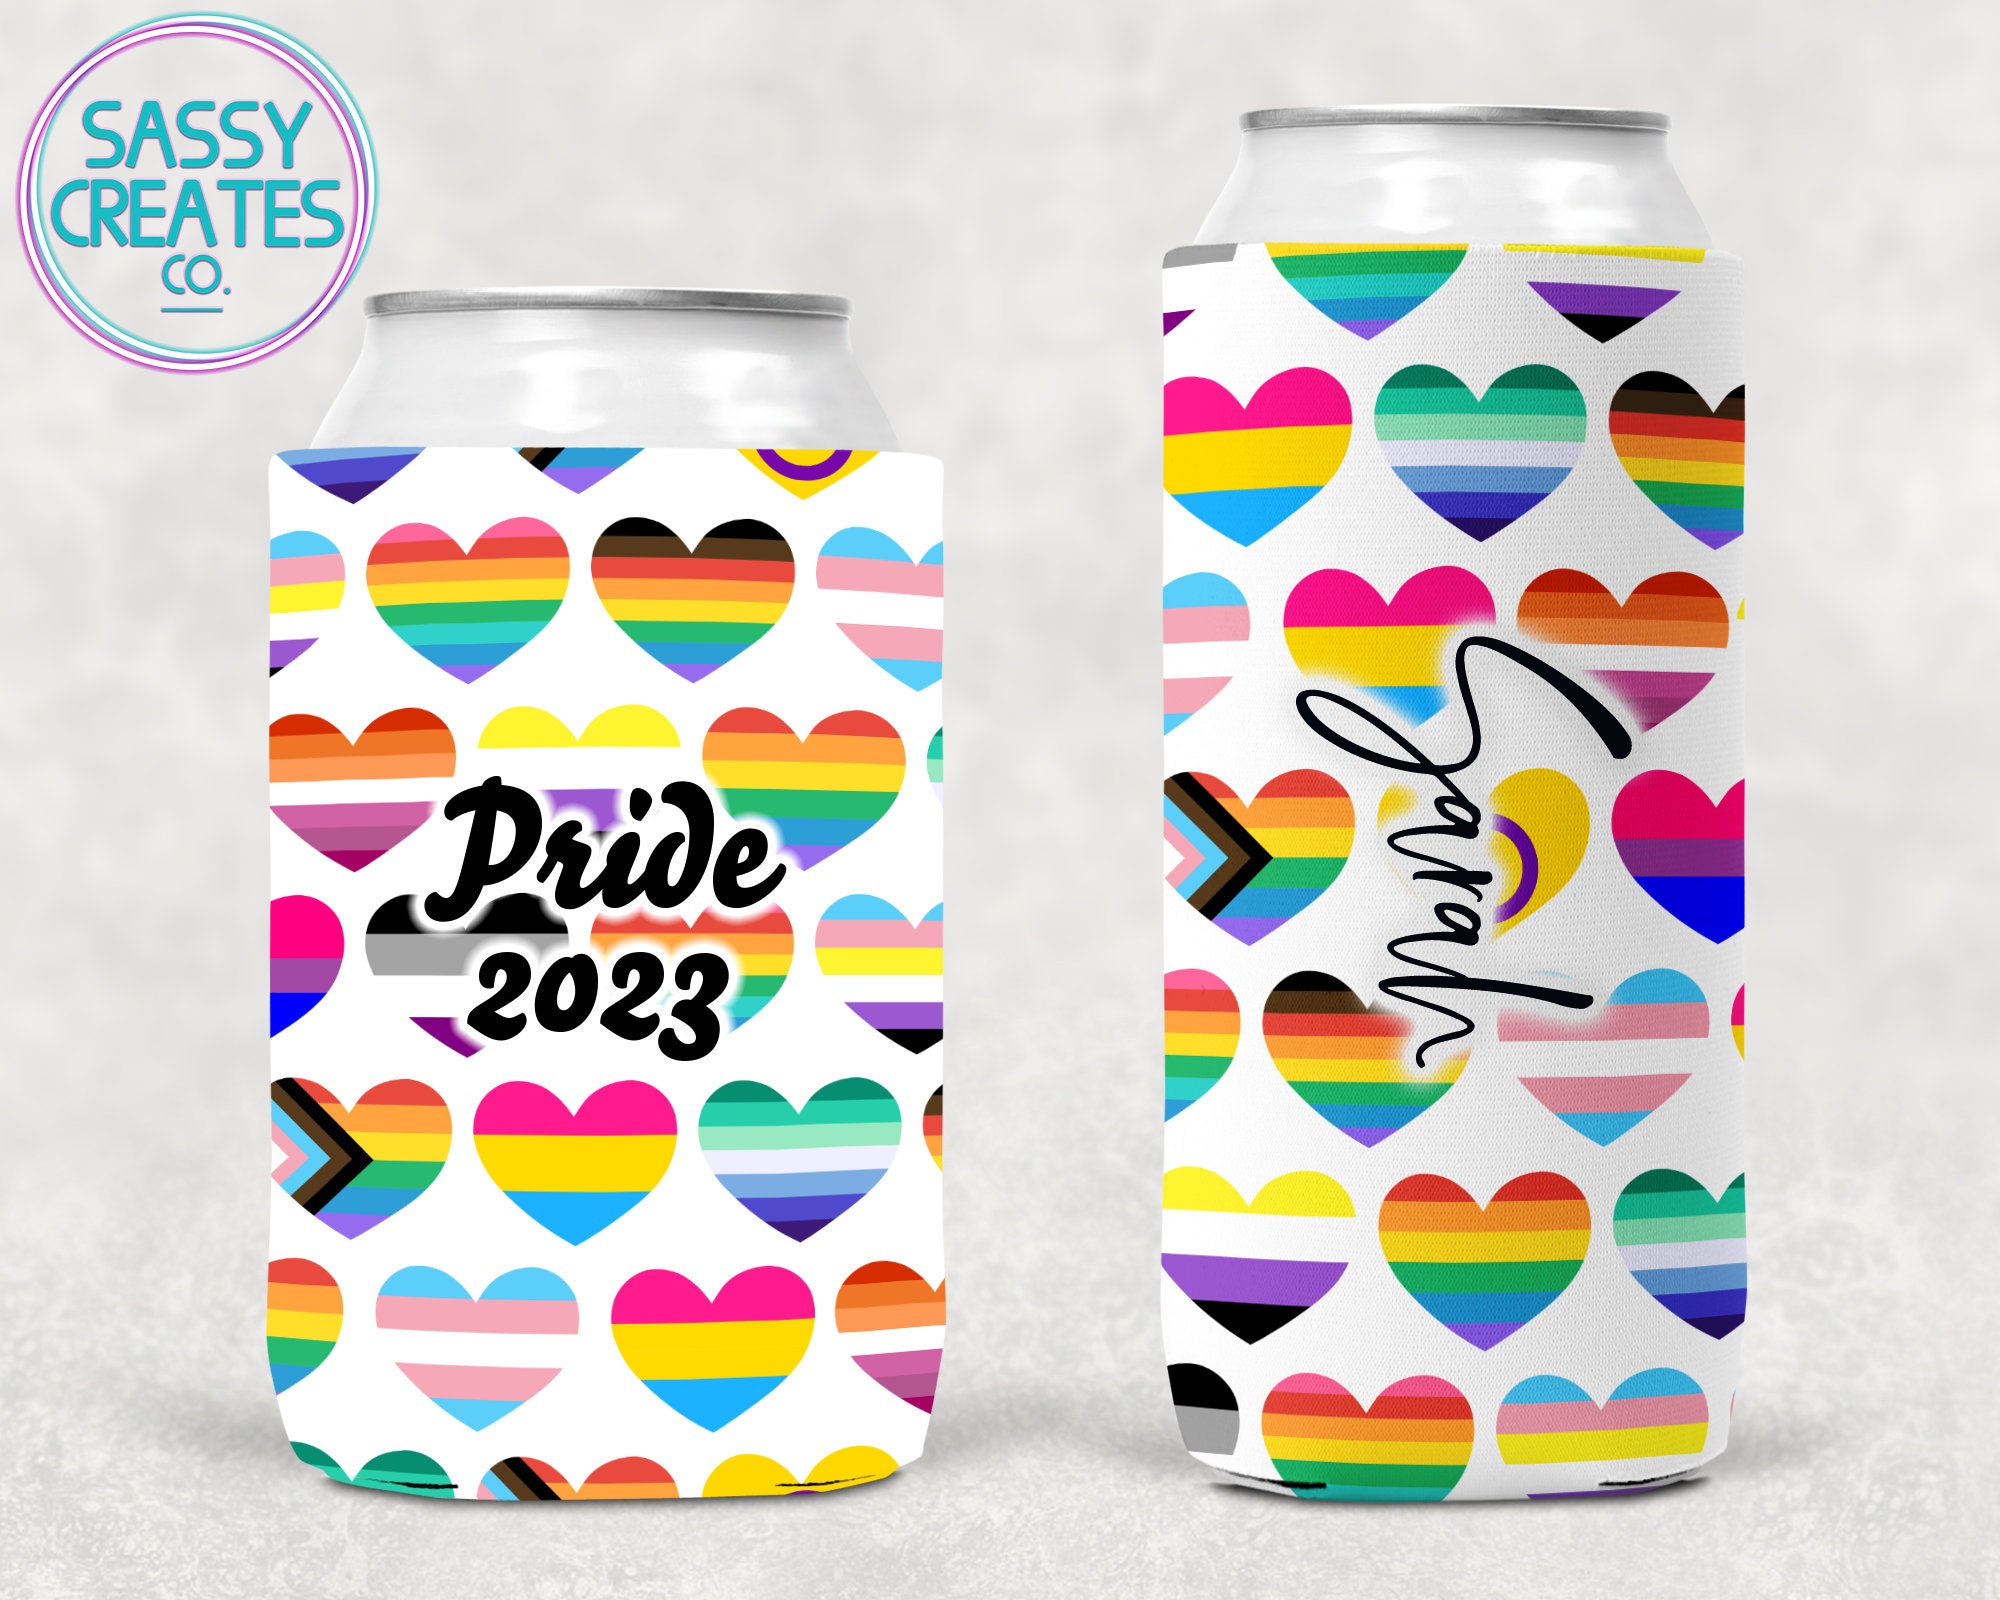 Sounds Gay I'm In, LGBTQ, Funny Can Cooler, Gay Pride, Neoprene